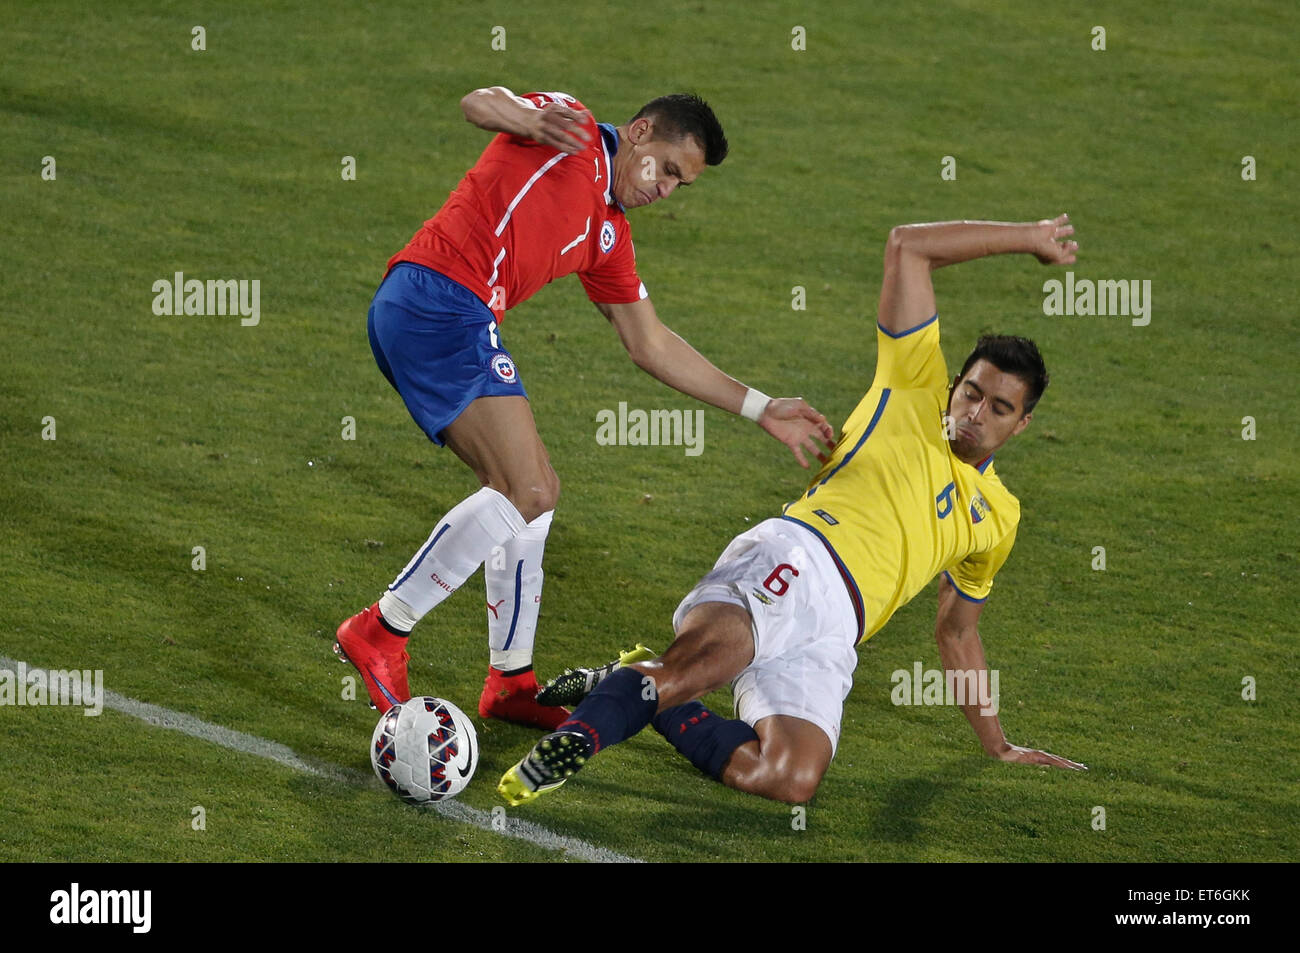 Santiago, Chile. 11th June, 2015. Alexis Sanchez (L) of Chile vies for the ball with Christian Noboa (R) from Ecuador during the opening match of the Copa America 2015, in Santiago, capital of Chile, on June 11, 2015. Chile won 1-0. Credit:  Jorge Villegas/Xinhua/Alamy Live News Stock Photo